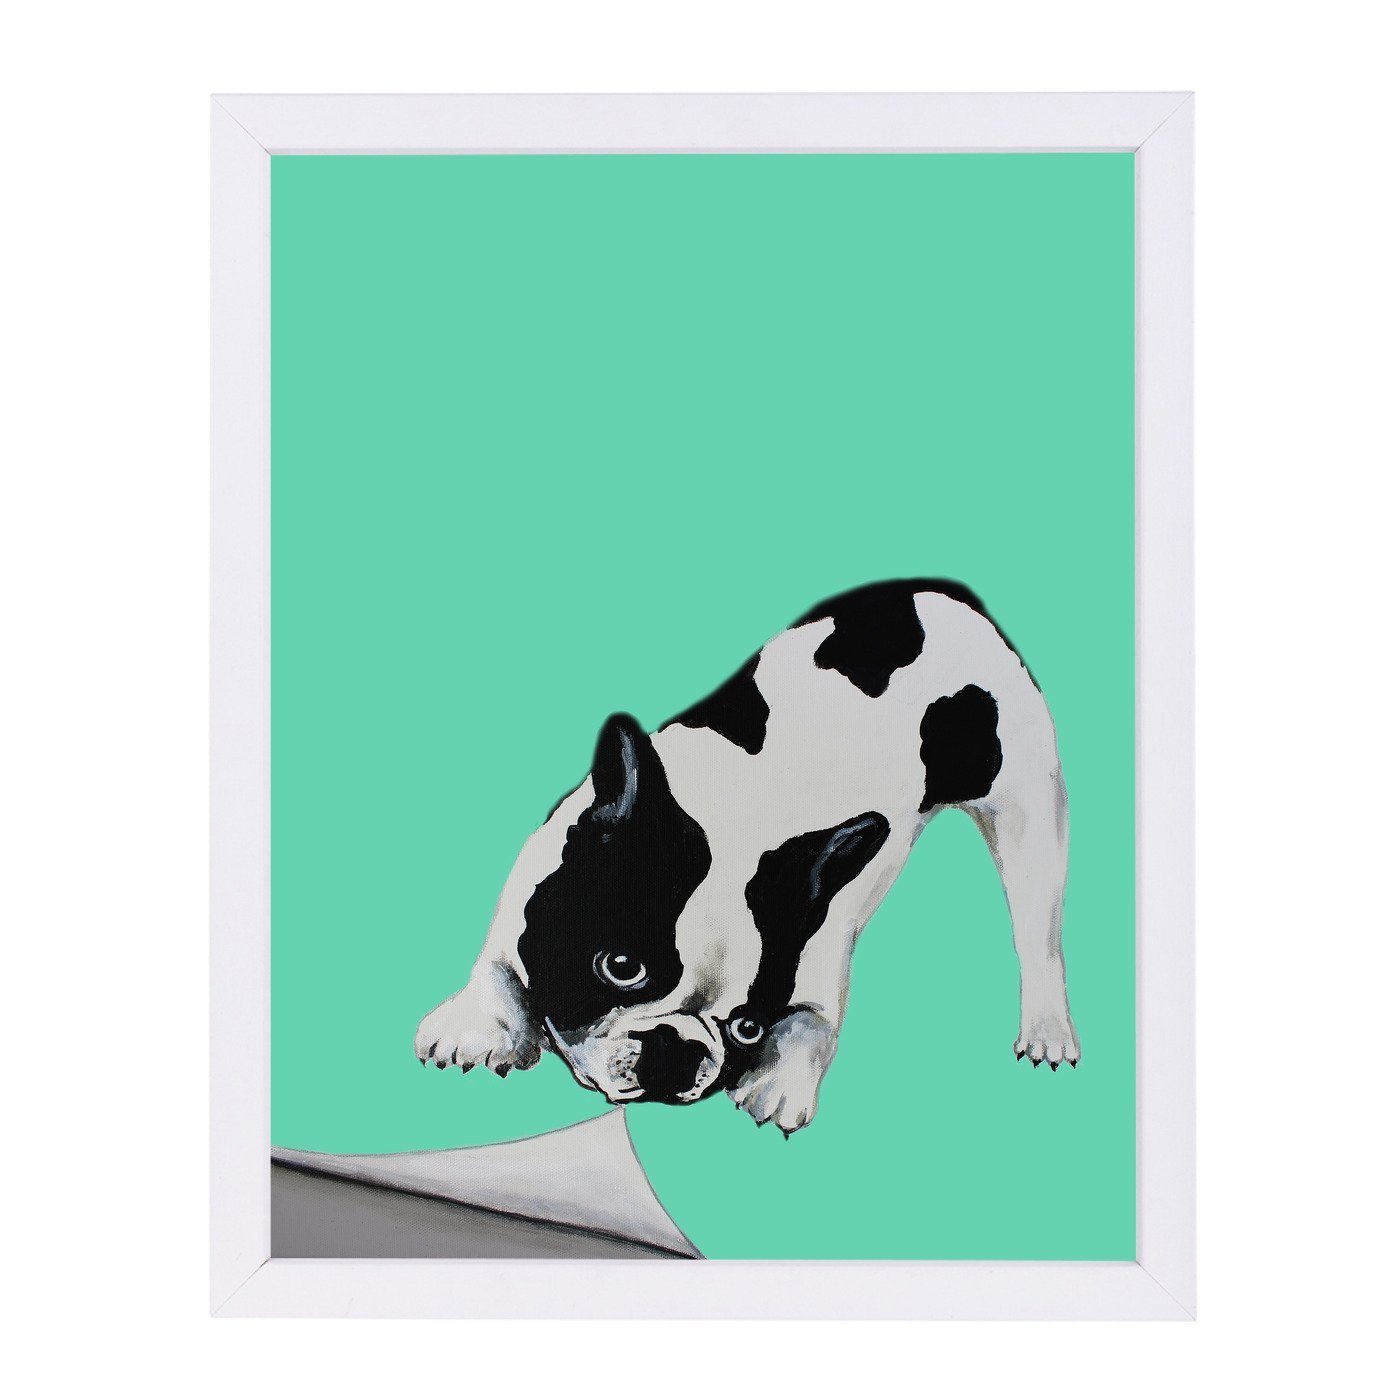 Bulldog Turning Paper By Coco De Paris - Framed Print - Americanflat